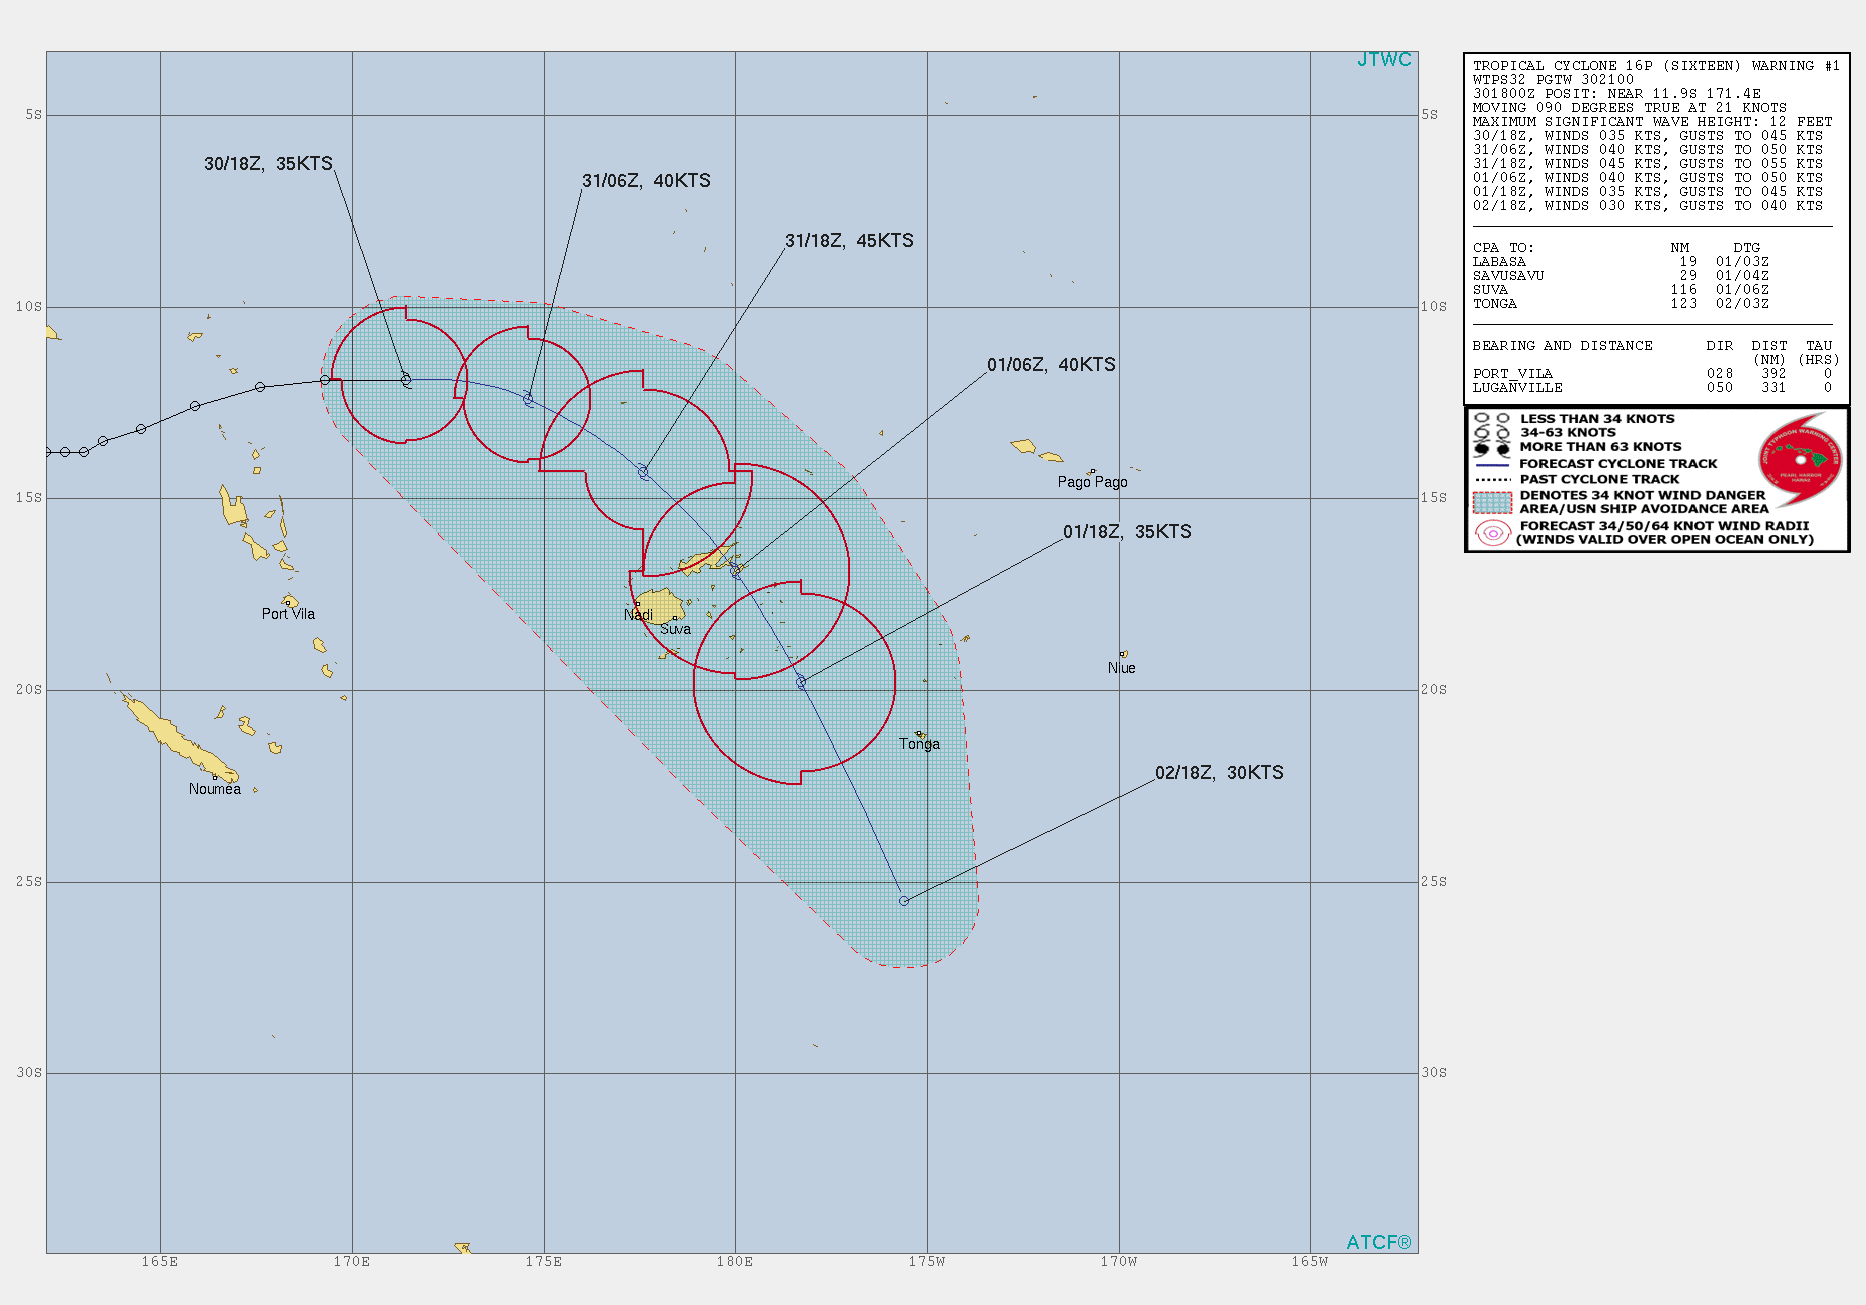 16P. WARNING 1.THE INITIAL POSITION IS ASSESSED  WITH MODERATE CONFIDENCE. THE INITIAL INTENSITY IS SET AT 35 KNOTS.16P IS TRACKING QUICKLY TOWARDS THE EAST UNDER THE  STEERING INFLUENCE OF A LOW TO MID-LEVEL NEAR EQUATORIAL RIDGE (NER)  CENTERED TO THE NORTH. OVER THE NEXT 24 TO 36 HOURS, THE SYSTEM IS  FORECAST TO TURN TOWARDS THE SOUTHEAST AS THE PRIMARY STEERING  MECHANISM SHIFTS TO THE SUBTROPICAL RIDGE (STR) CENTERED TO THE  EAST. AFTER 36H, THE SYSTEM WILL BEGIN TO INTERACT WITH AND  BECOME CAPTURED BY TC 15P SOUTH OF FIJI, ULTIMATELY BECOMING  ABSORBED BY TC 15P BY 72H. OVER THE NEXT 24 HOURS THE SYSTEM  SHOULD REMAIN IN AN AREA OF FAVORABLE CONDITIONS, ALLOWING FOR A  SHORT BURST OF INTENSIFICATION TO A PEAK OF 45 KNOTS BY 24H.  THEREAFTER THE SYSTEM WILL SLOWLY WEAKEN AS IT ENCOUNTERS INCREASING  WIND SHEAR AND CONVERGENT FLOW ALOFT EMANATING FROM THE OUTFLOW ASSOCIATED  WITH TC 15P. AS THE SYSTEM CLOSES AND MERGES WITH TC 15P, THE  COMBINATION OF THE CONVERGENT FLOW ALOFT, COOLER SEAS AND DISRUPTION  OF THE LOW-LEVEL INFLOW WILL LEAD TO DISSIPATION AS A DISTINCT  TROPICAL CYCLONE BY 72H.